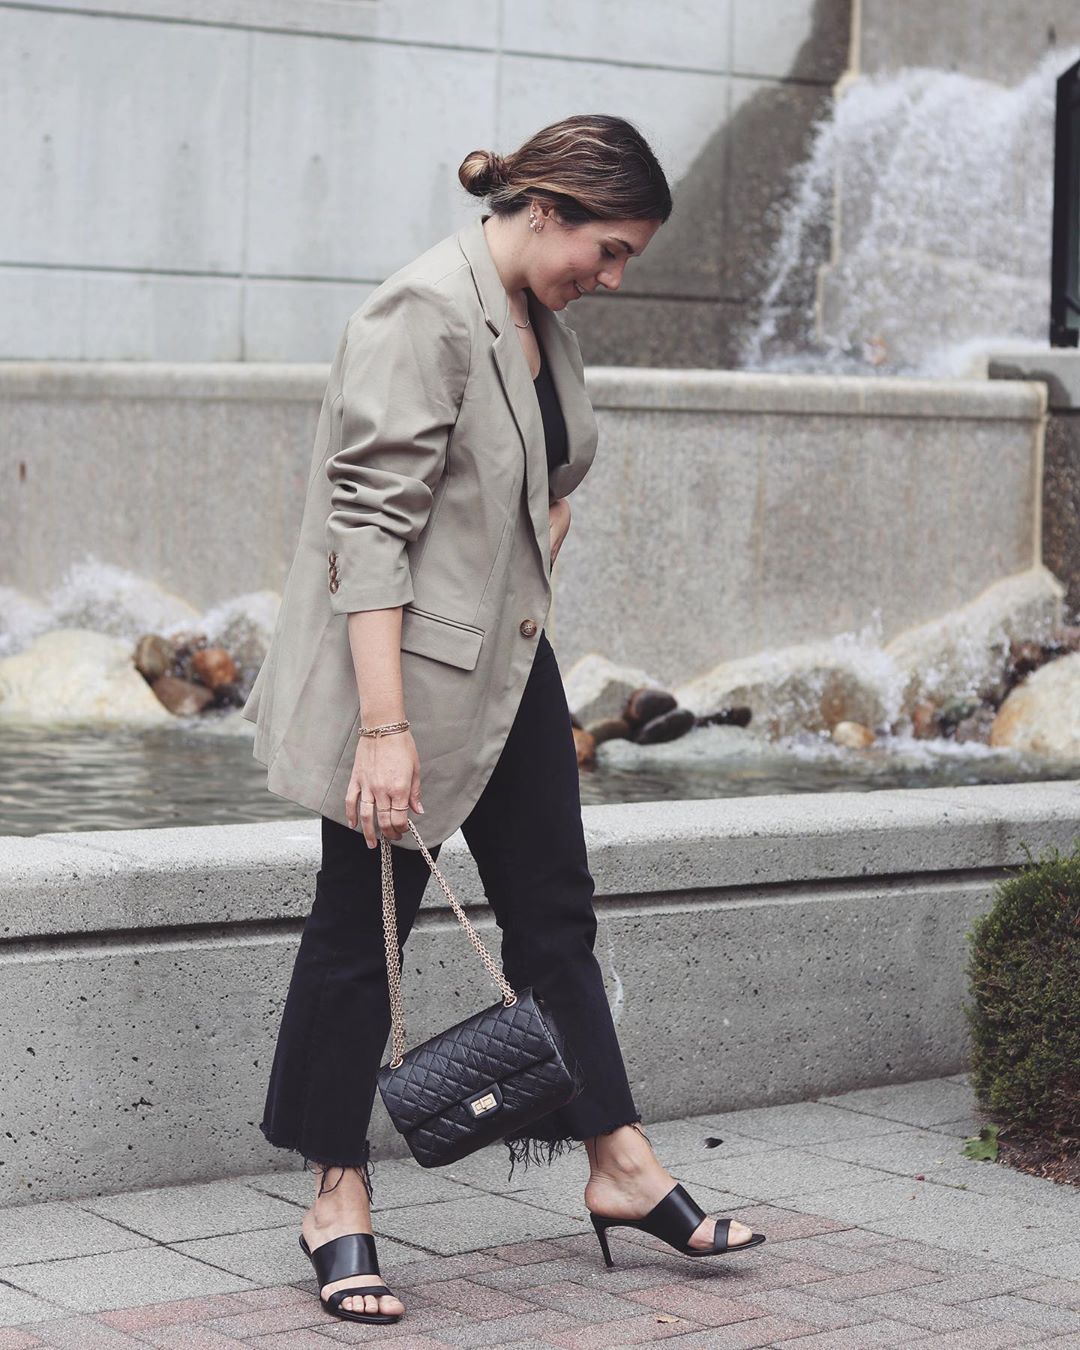 This Chic Look Easily Transitions From Day to Night